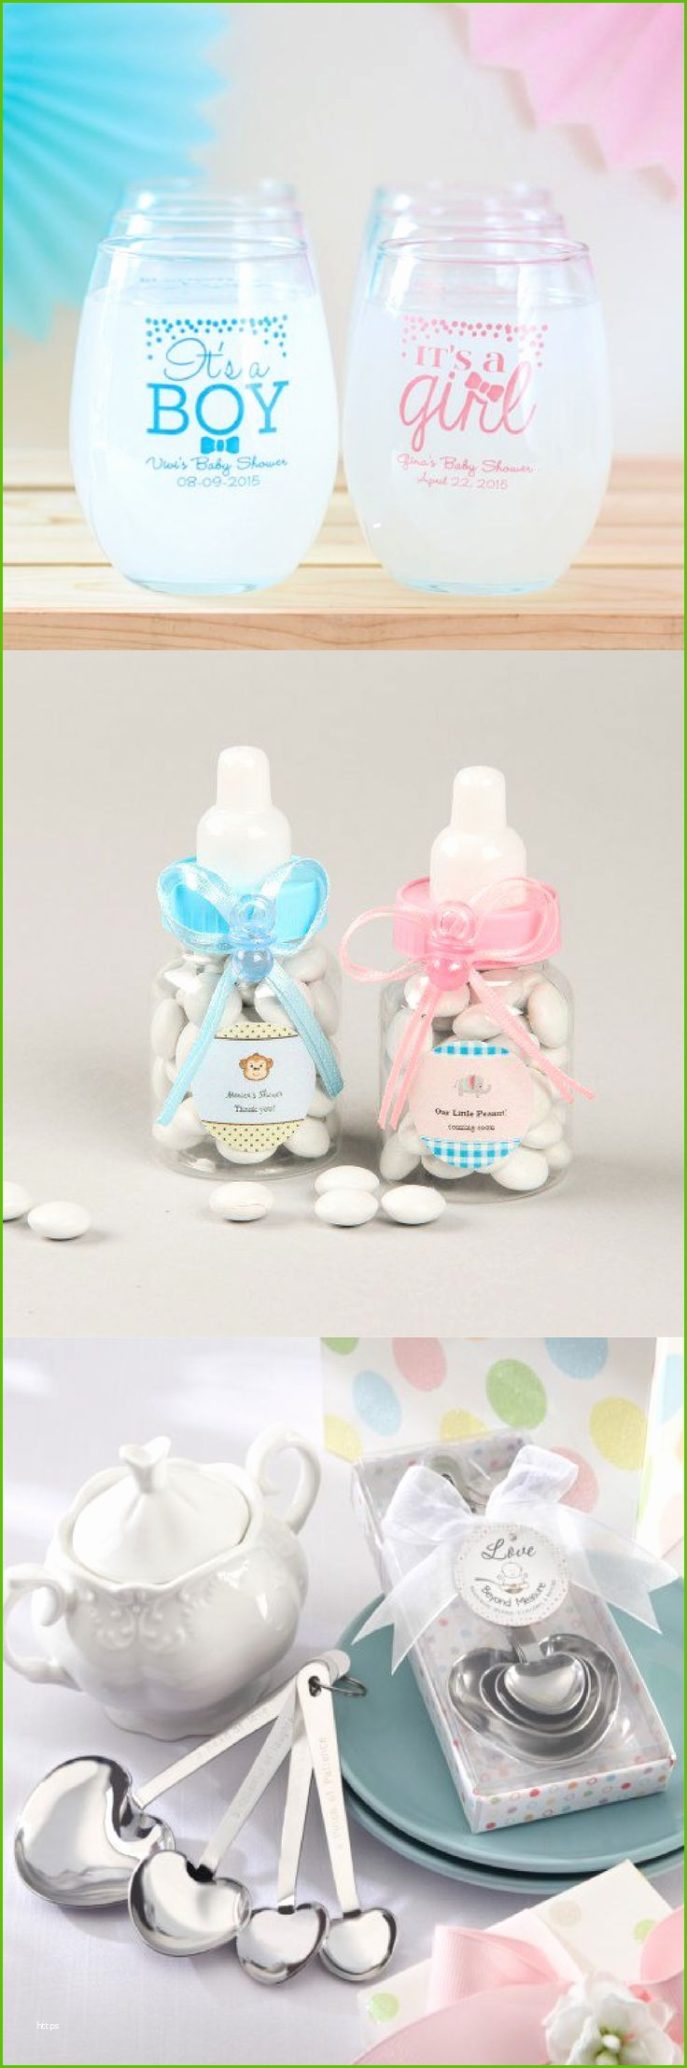 Large Size of Baby Shower:enamour Baby Shower Gifts For Guests Picture Ideas Baby Shower Gifts For Guests Baby Shower Gifts For Guests Inspirational Thank Your Guests With The Perfect Baby Shower Favors